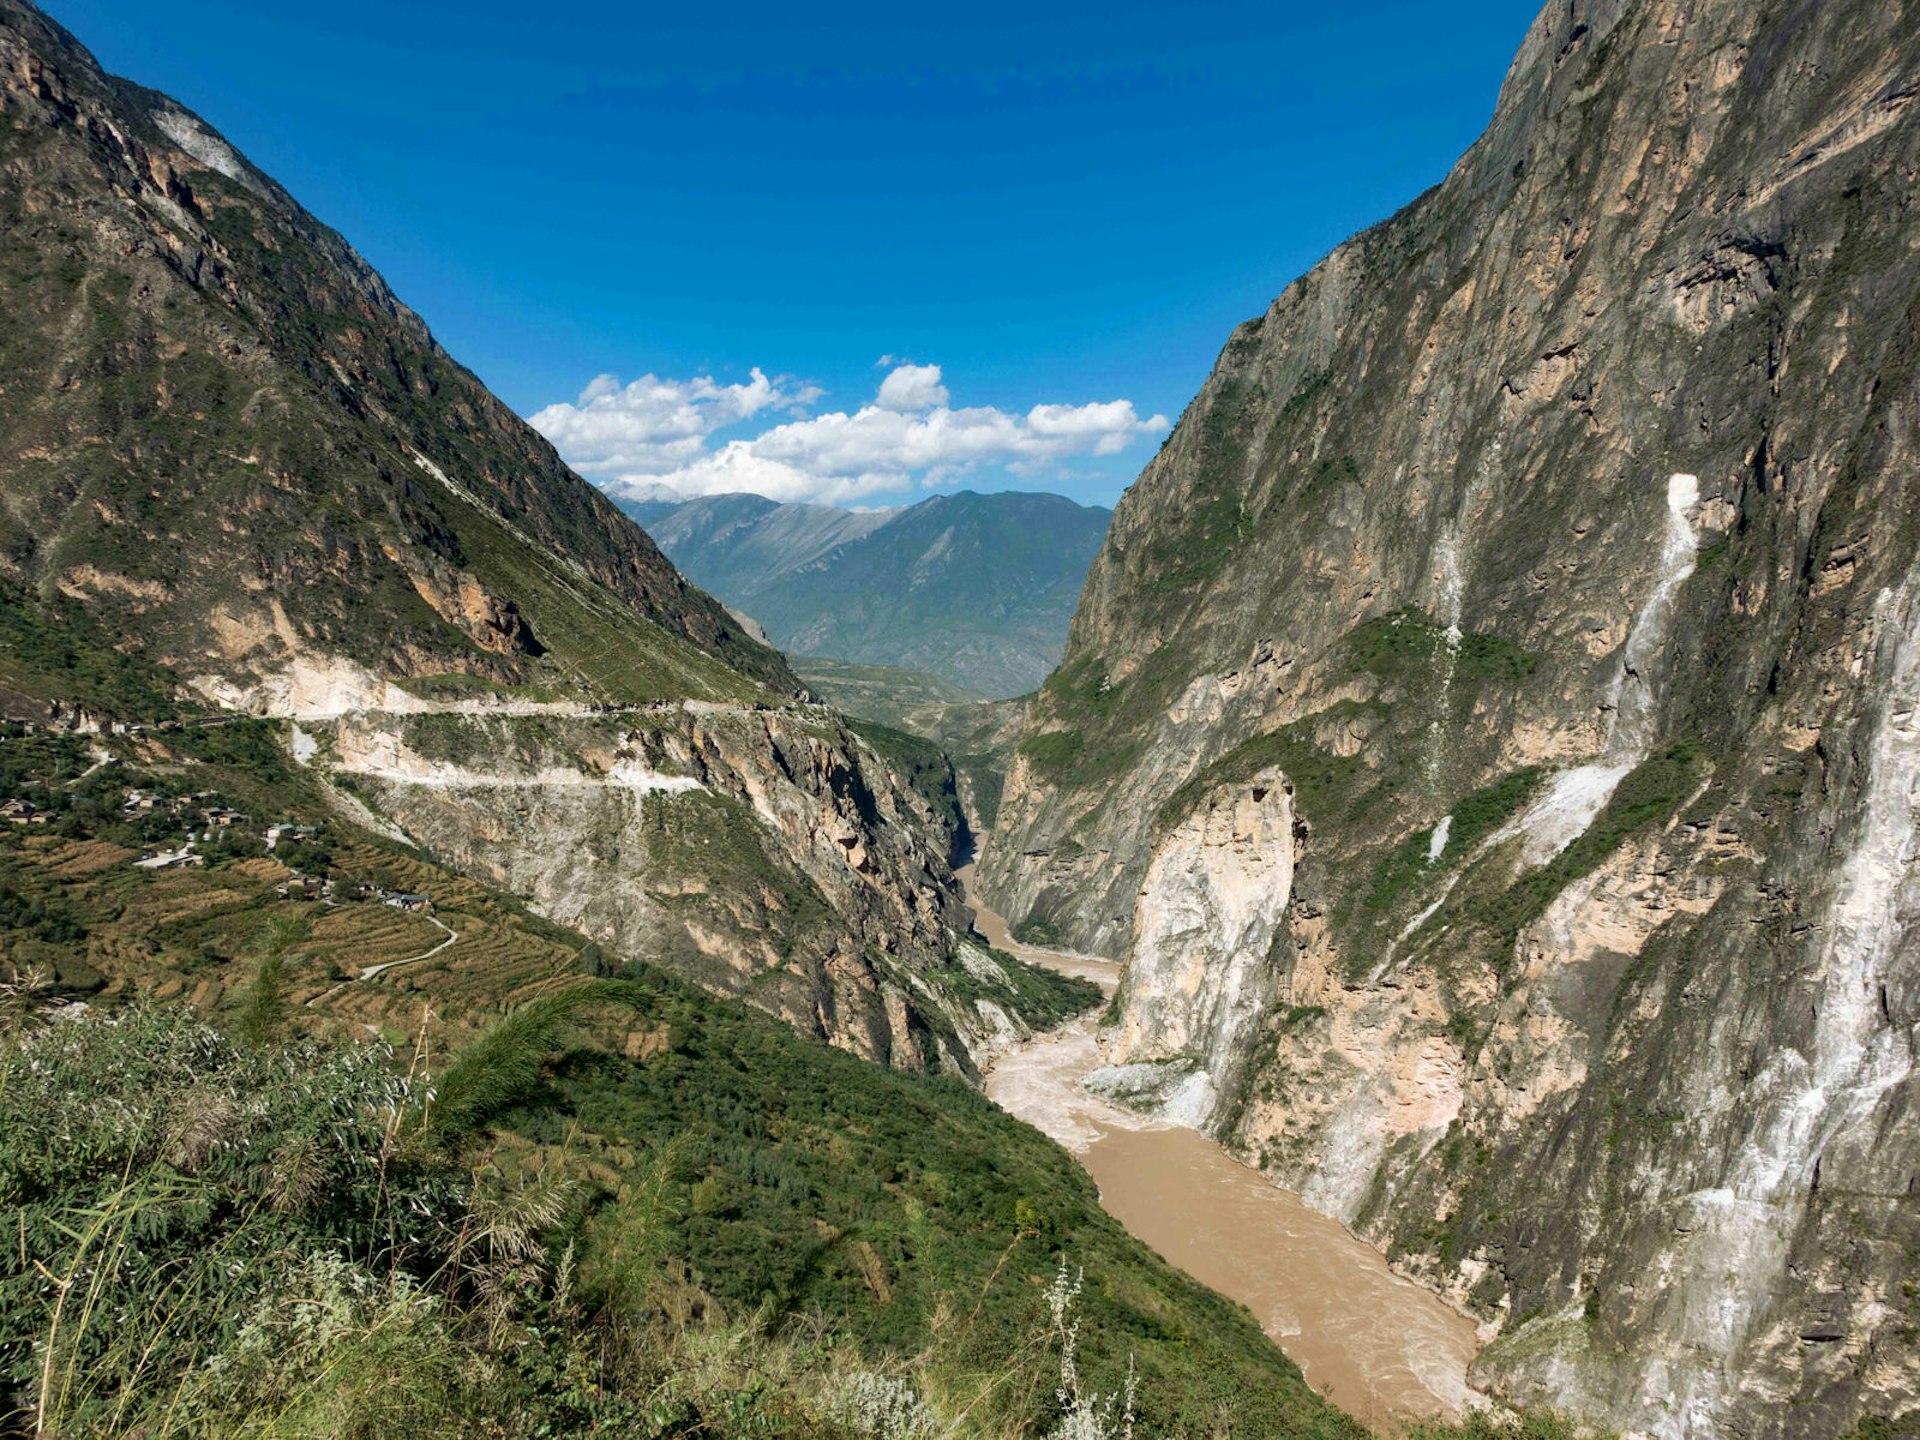 Hiking Tiger Leaping Gorge offers a scenic break from the saddle © Tess Humphrys / Lonely Planet